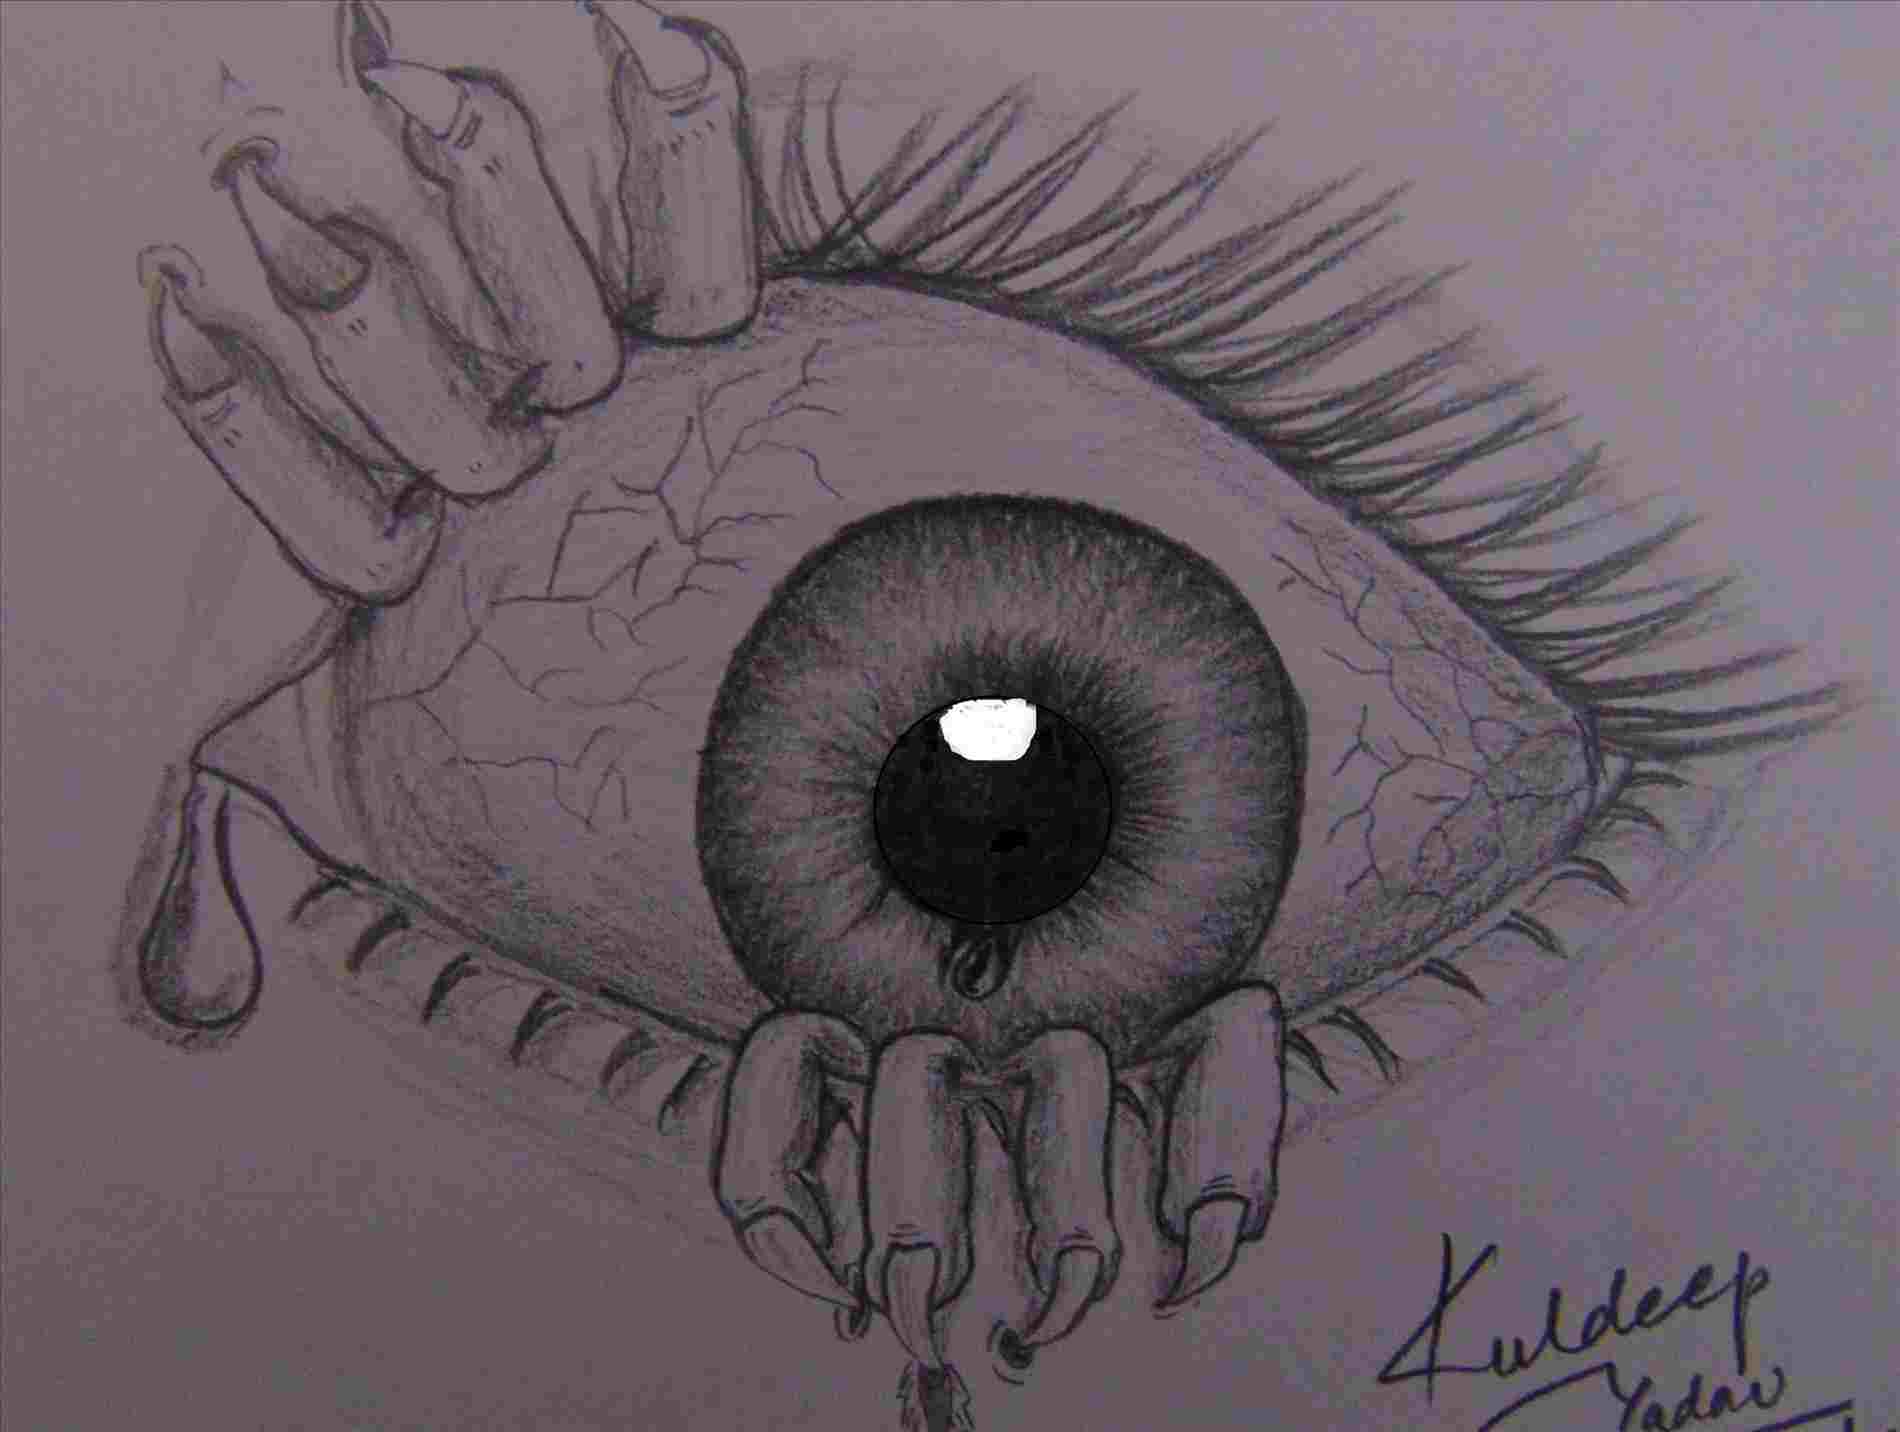 The Most Idea Scary Eyes Drawing - DIARY DRAWING IMAGES